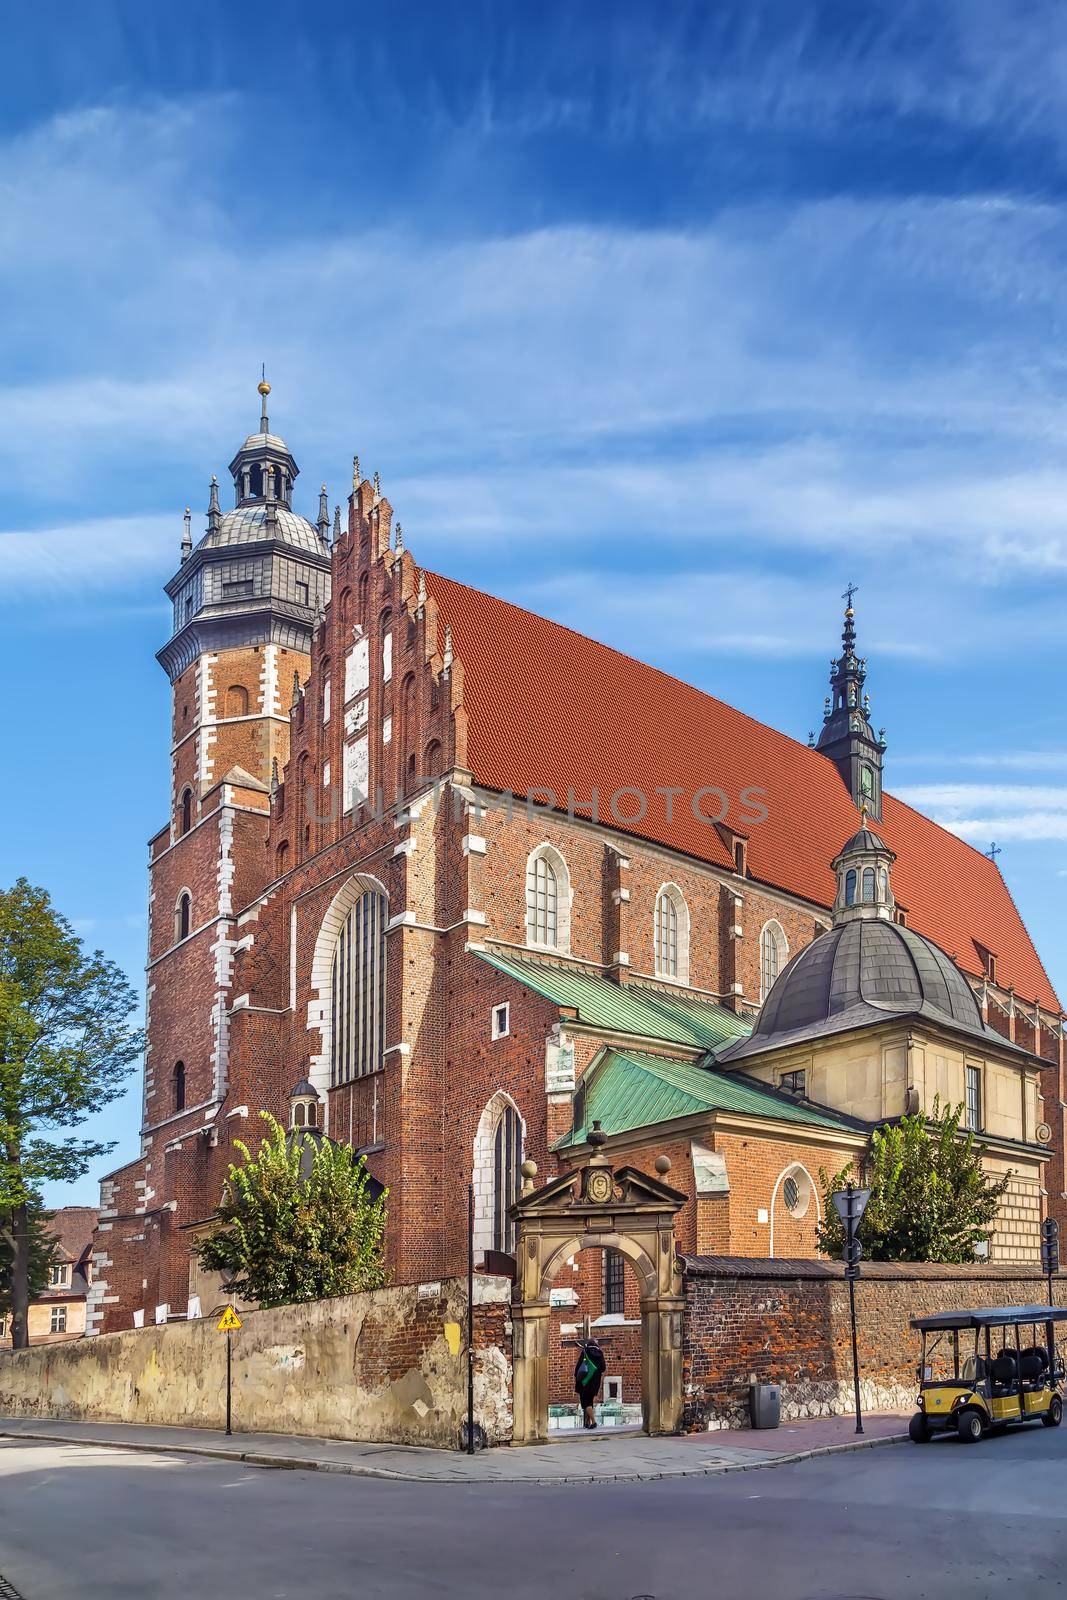 Corpus Christi Basilica located in the Kazimierz district of Krakow, Poland is a Gothic church founded in 1335.